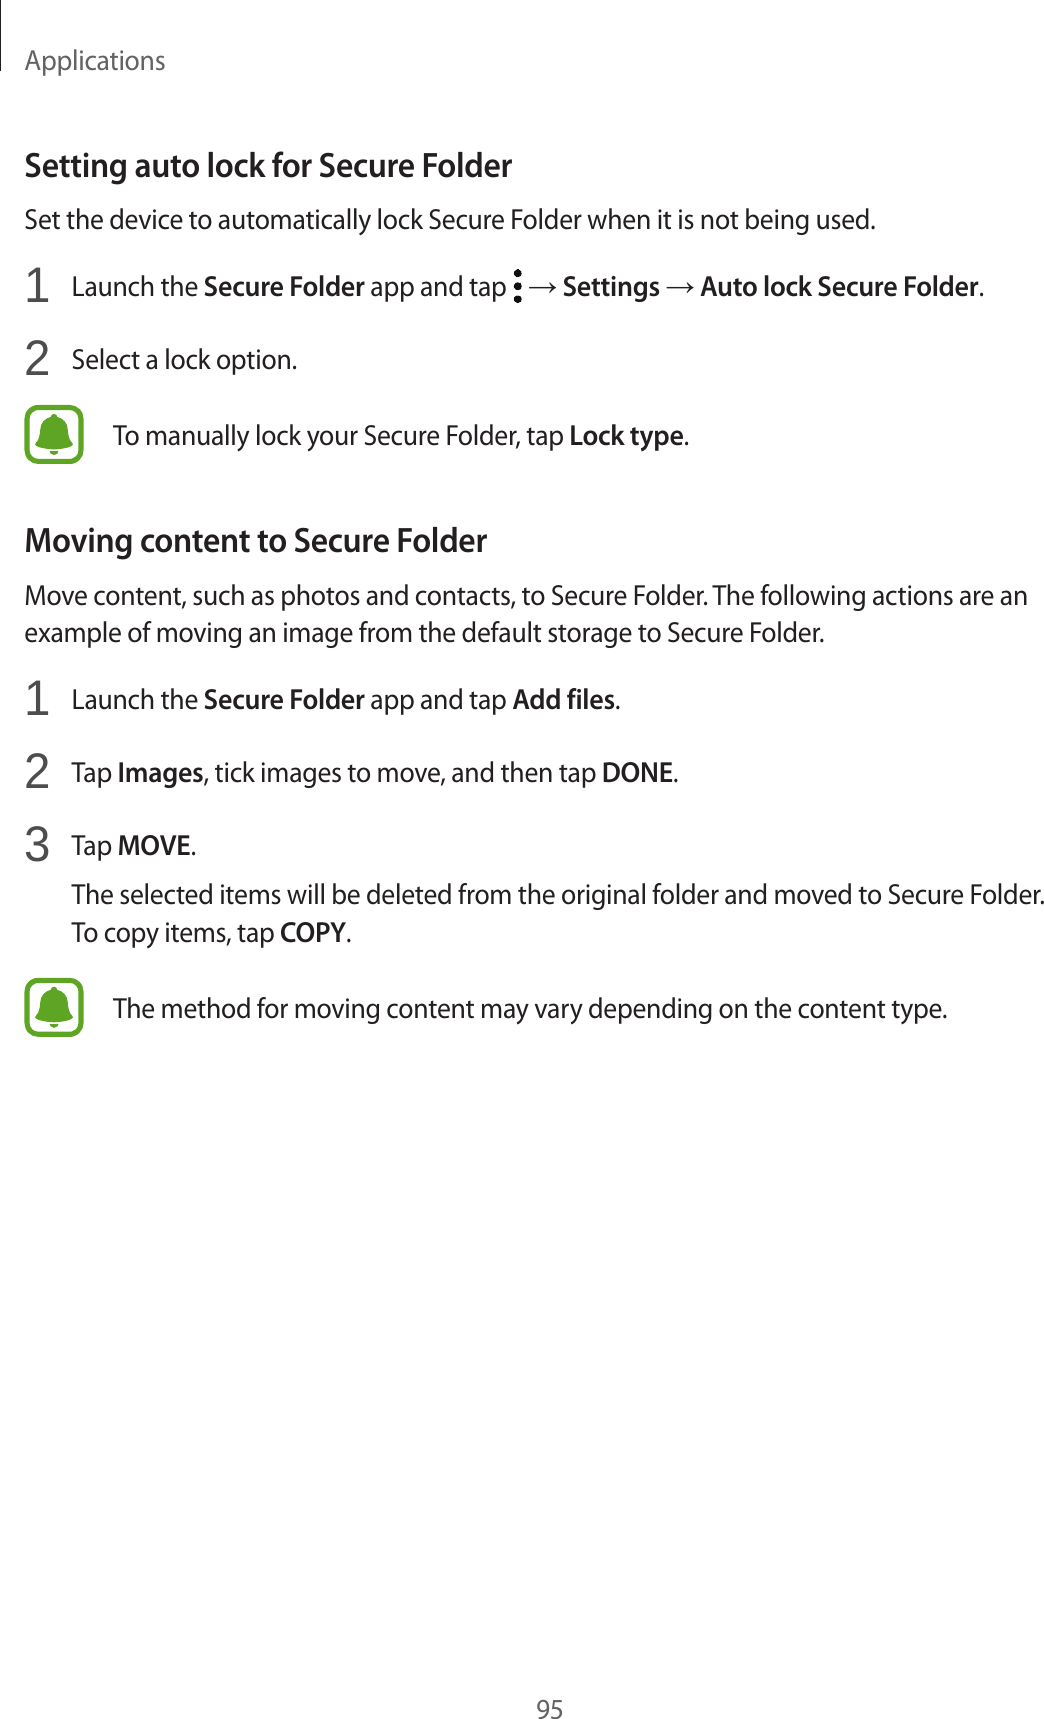 Applications95Setting auto lock for Secure FolderSet the device to automatically lock Secure Folder when it is not being used.1  Launch the Secure Folder app and tap   → Settings → Auto lock Secure Folder.2  Select a lock option.To manually lock your Secure Folder, tap Lock type.Moving content to Secure FolderMove content, such as photos and contacts, to Secure Folder. The following actions are an example of moving an image from the default storage to Secure Folder.1  Launch the Secure Folder app and tap Add files.2  Tap Images, tick images to move, and then tap DONE.3  Tap MOVE.The selected items will be deleted from the original folder and moved to Secure Folder. To copy items, tap COPY.The method for moving content may vary depending on the content type.